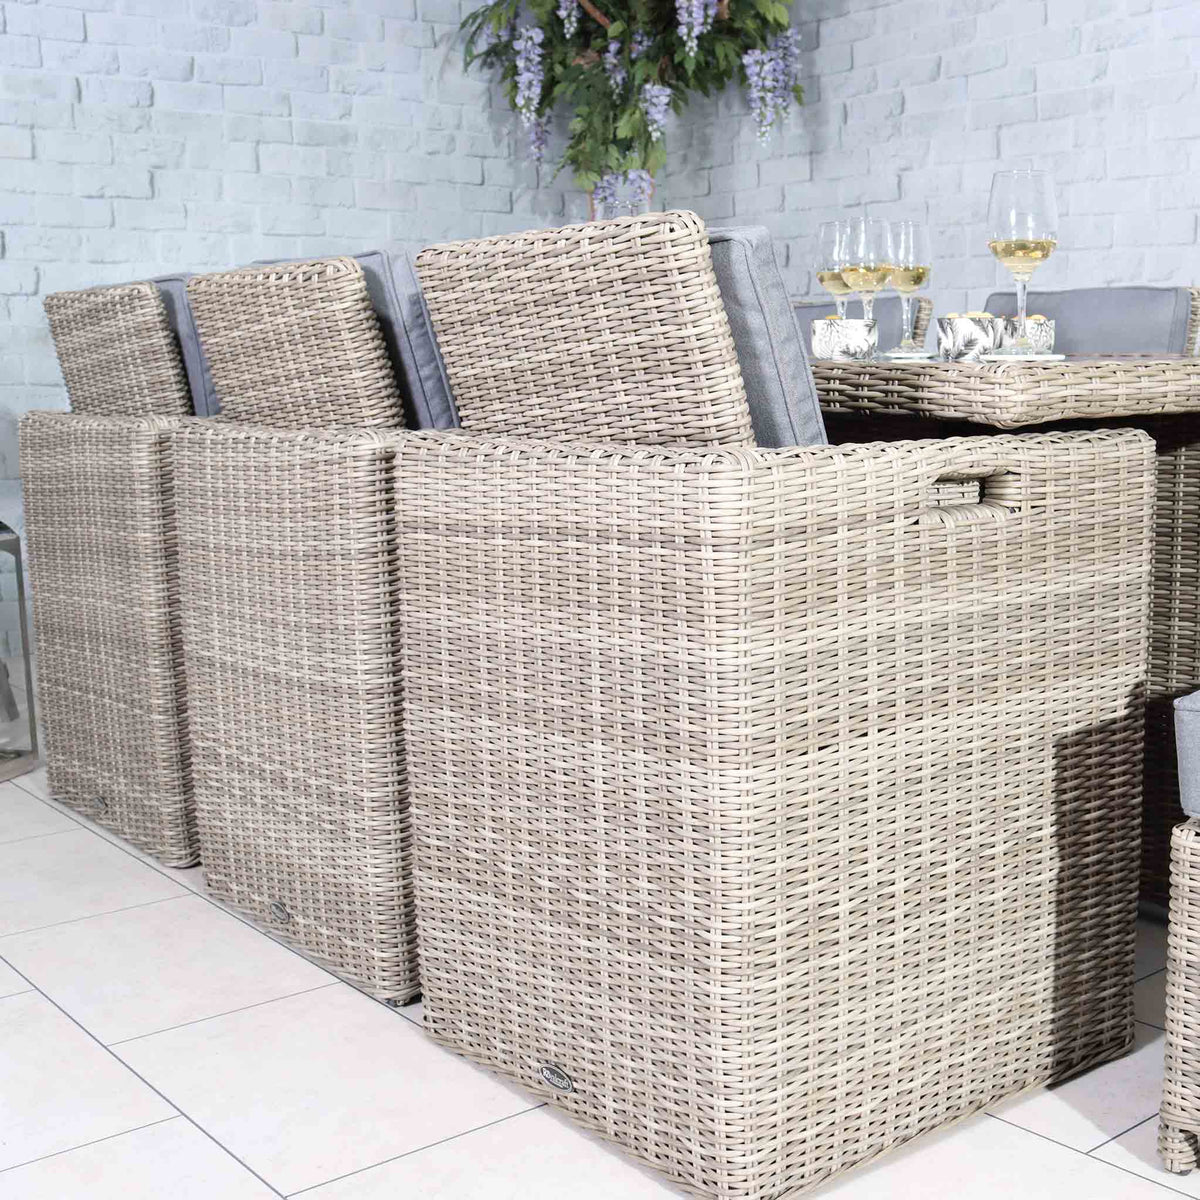 Wentworth 10 Seater Rattan Cube Garden Dining Set Lifestyle Close up